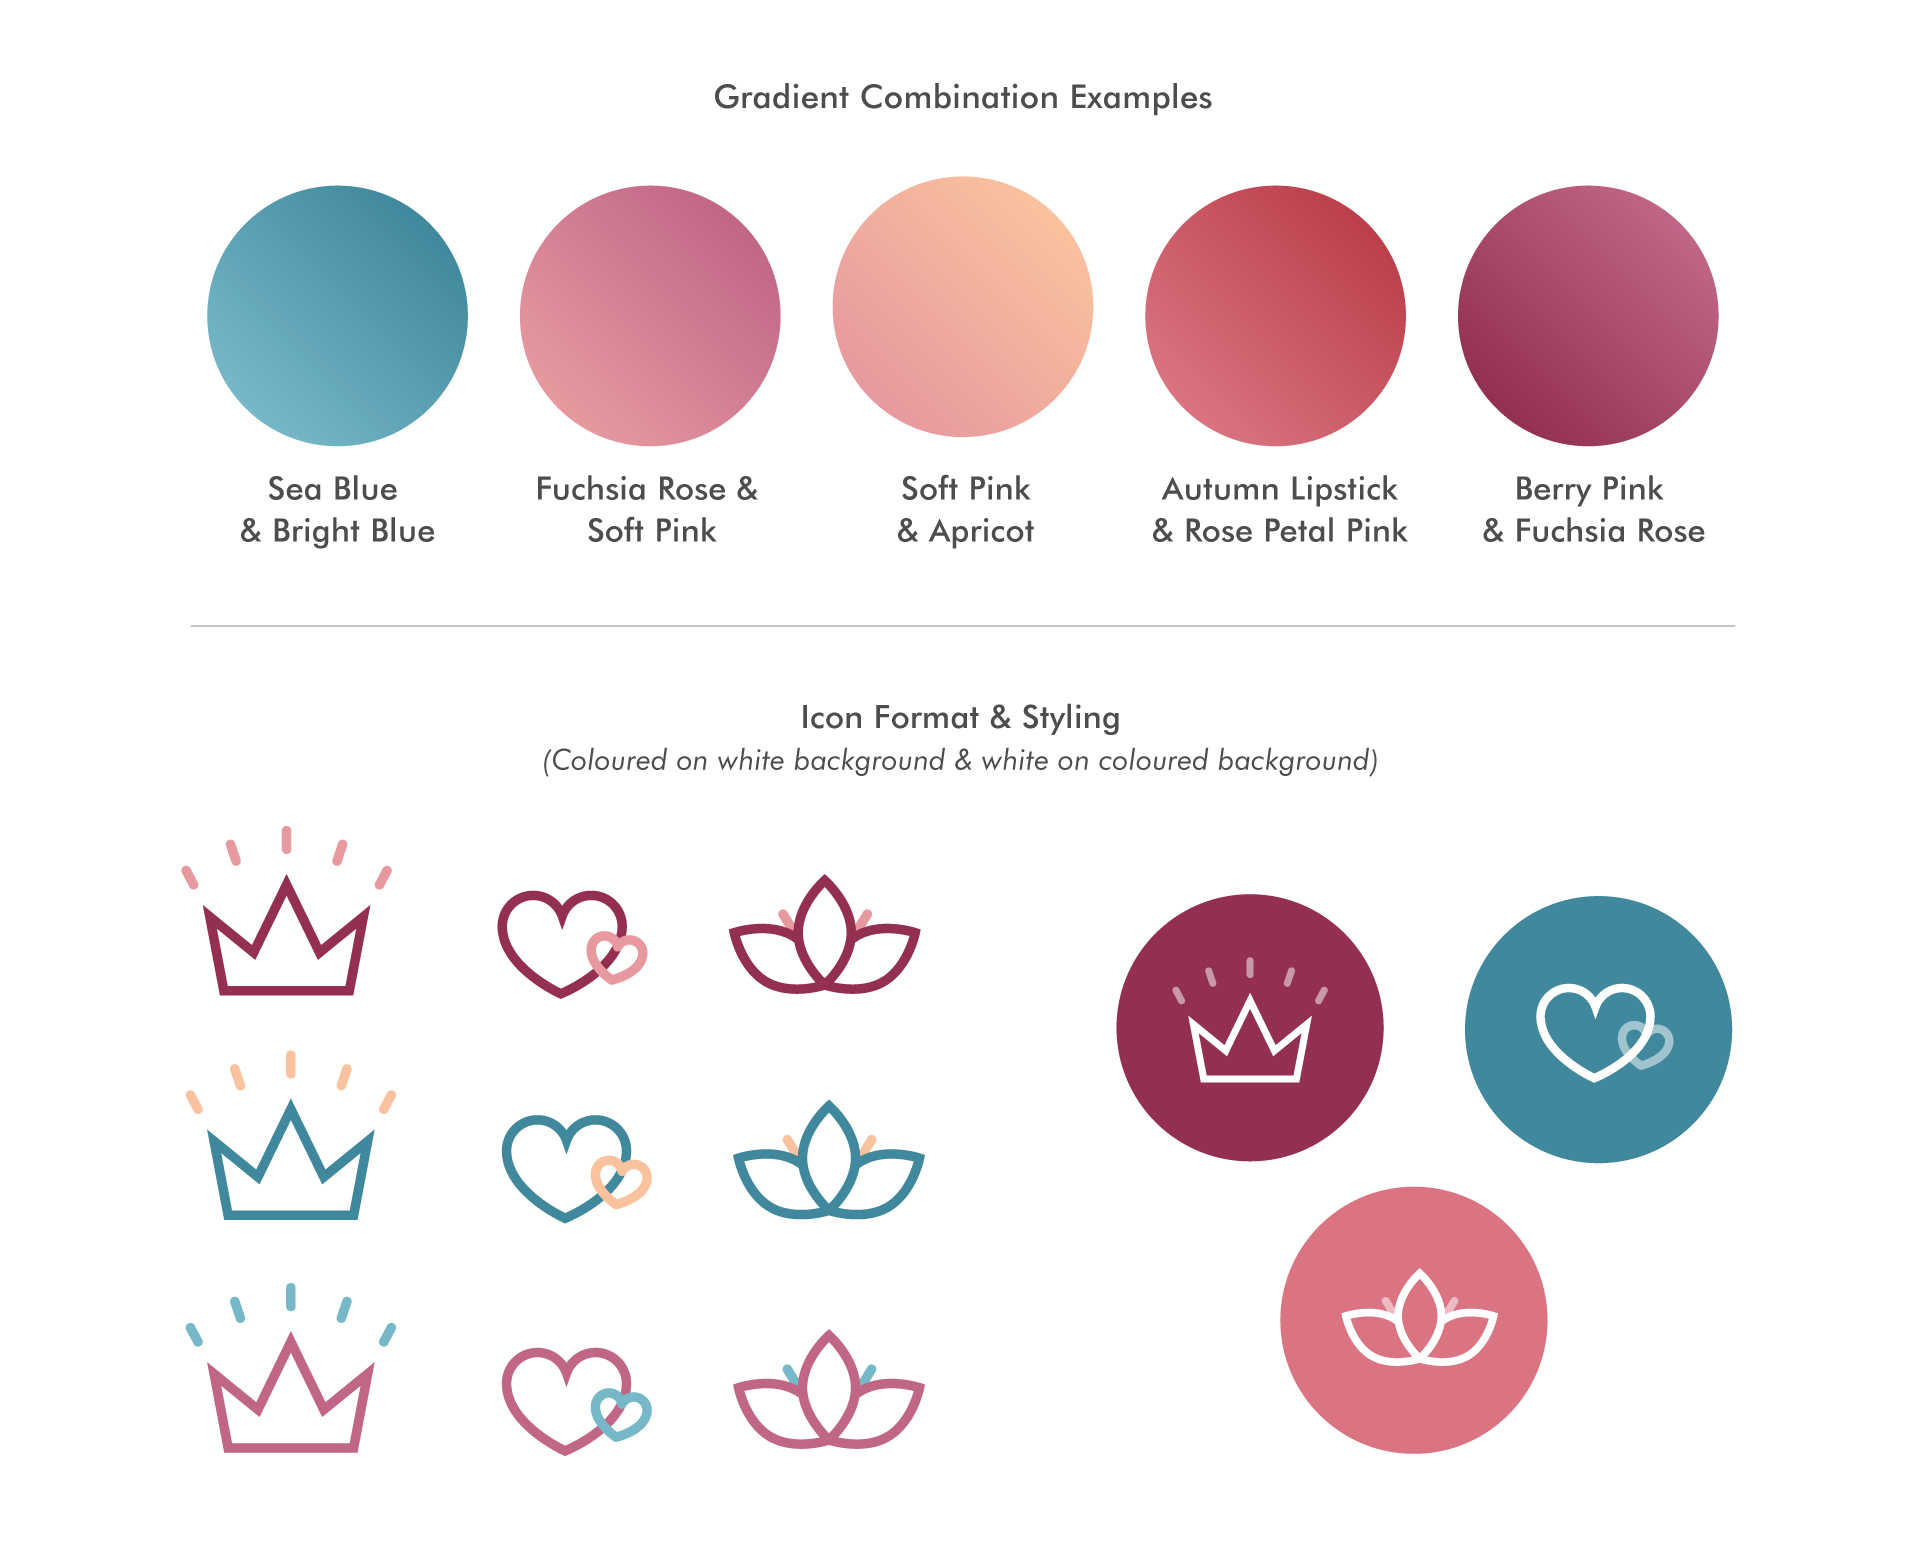 Image showing colour gradient combinations and icon designs for the Cath Carter Brand